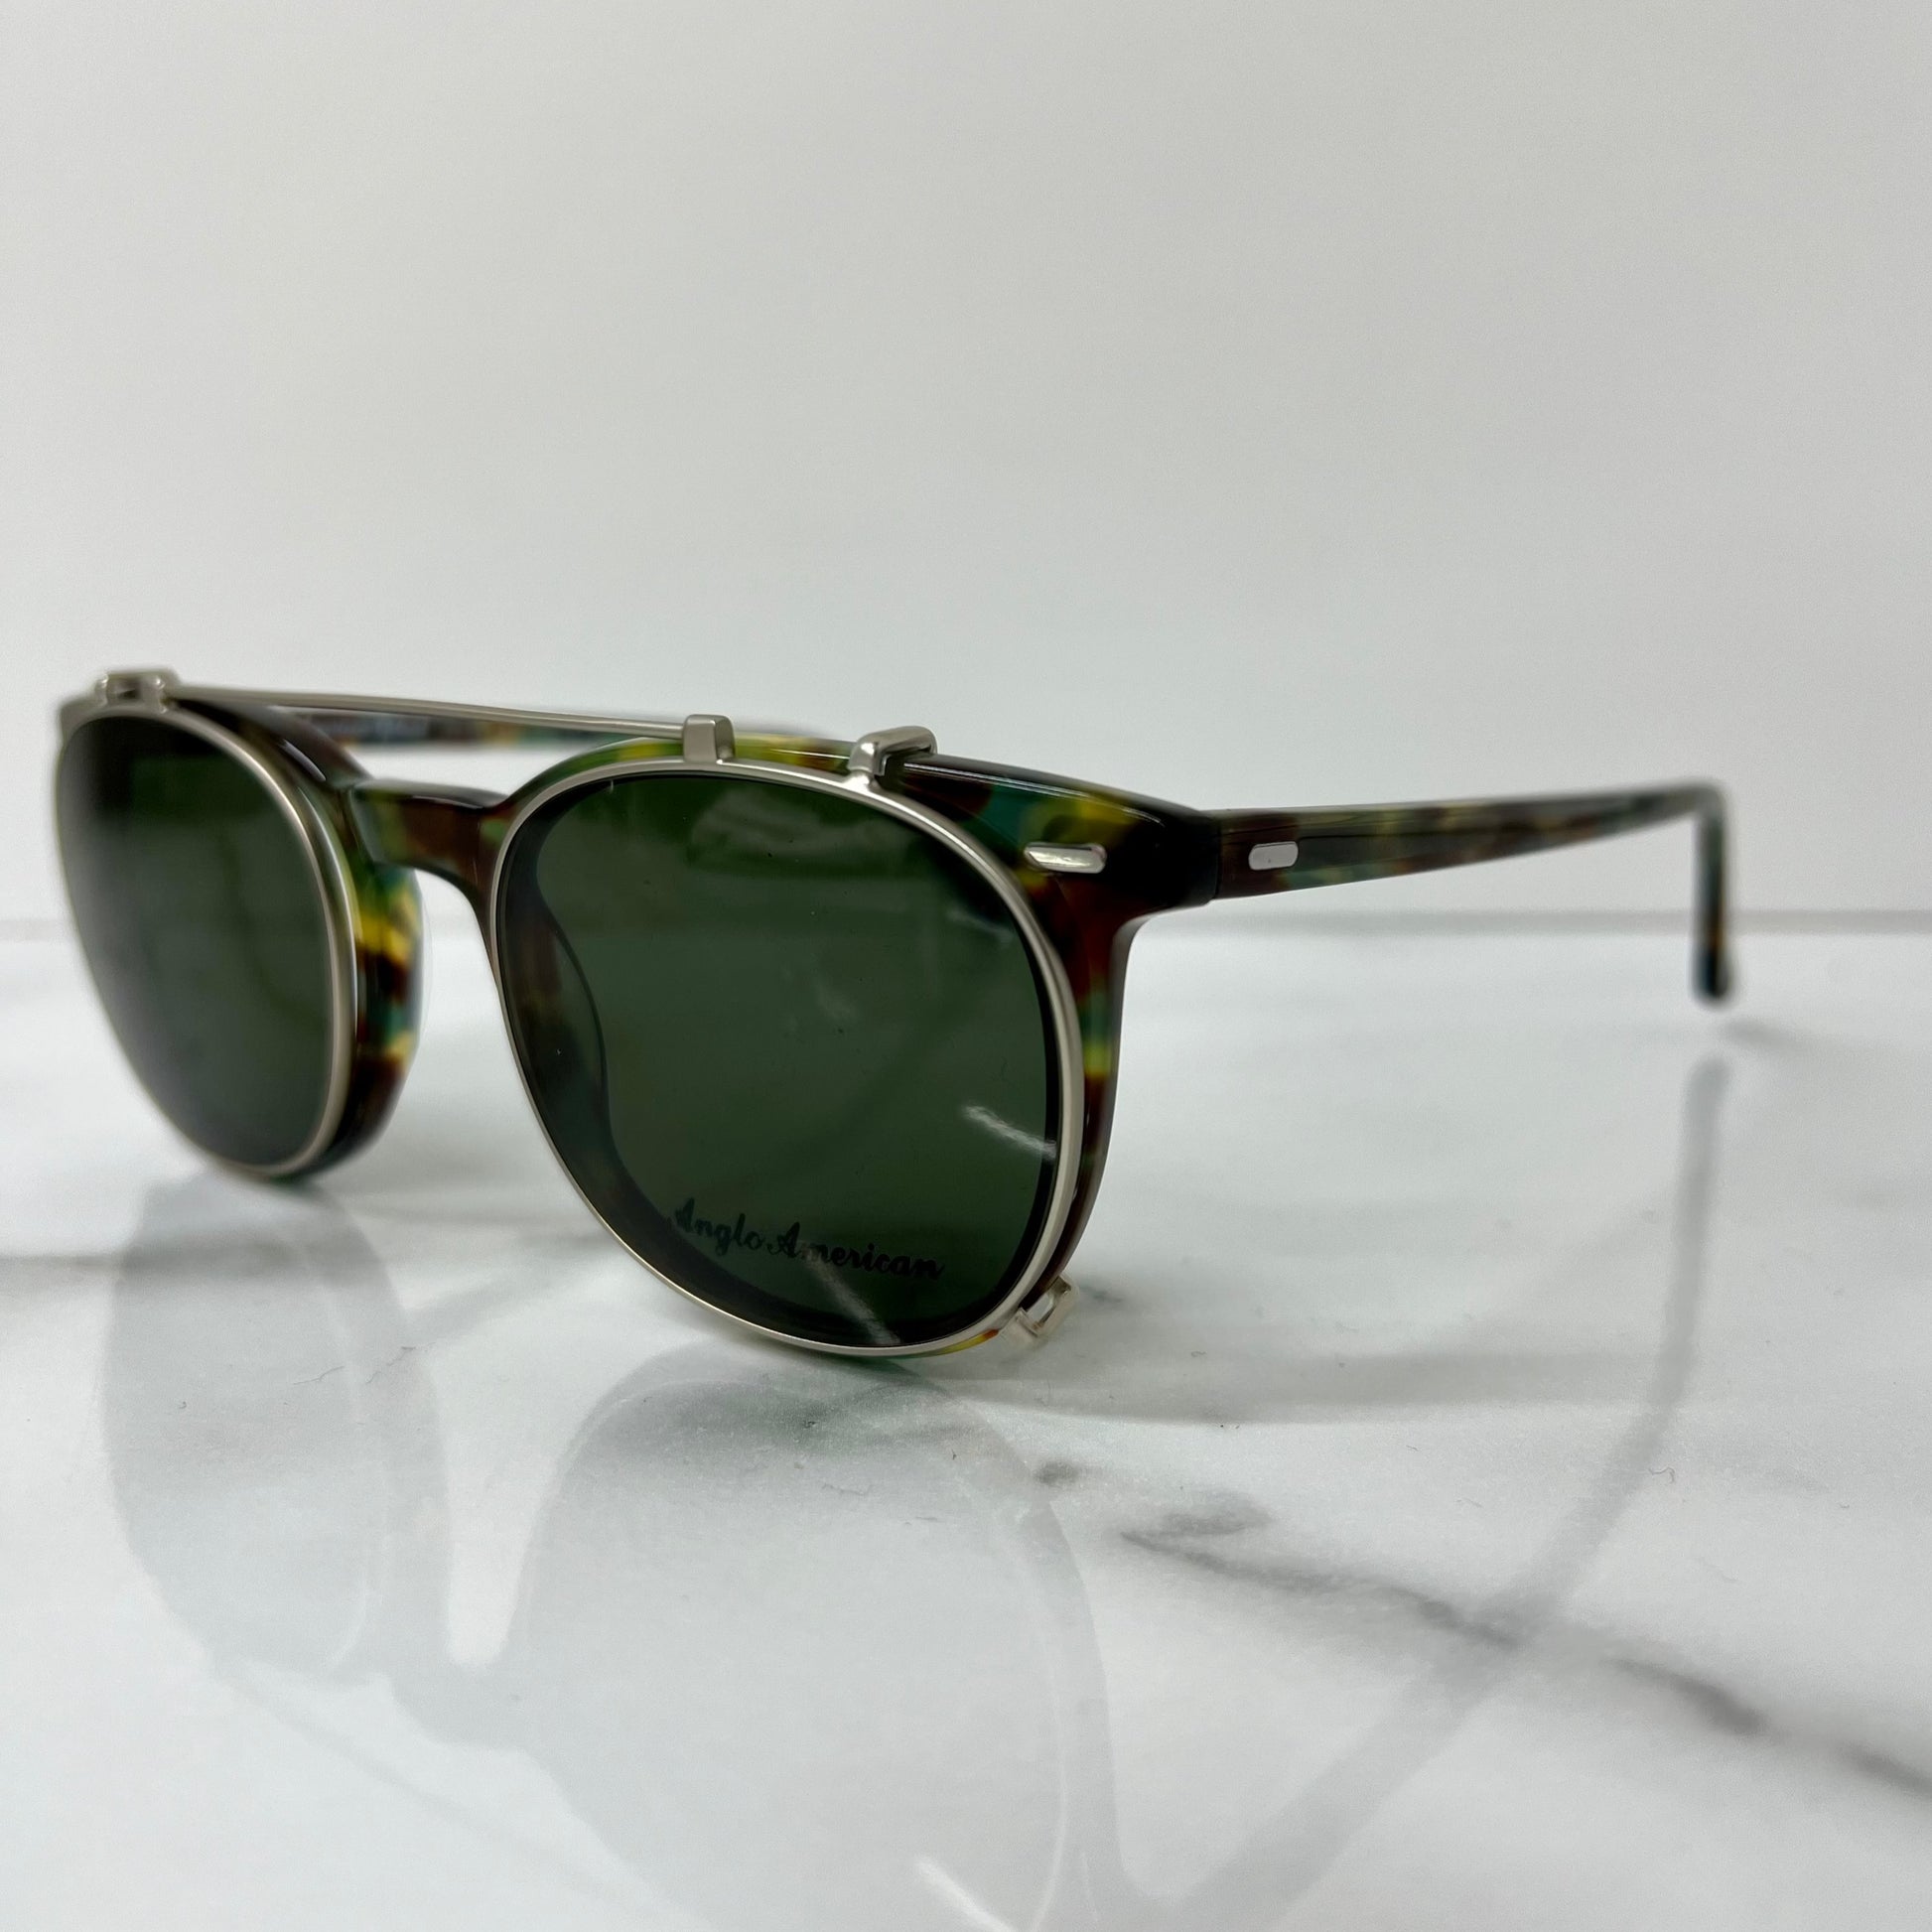 Anglo American Clip on Sunglasses 313 HYBG Green Camouflage Optical Glasses